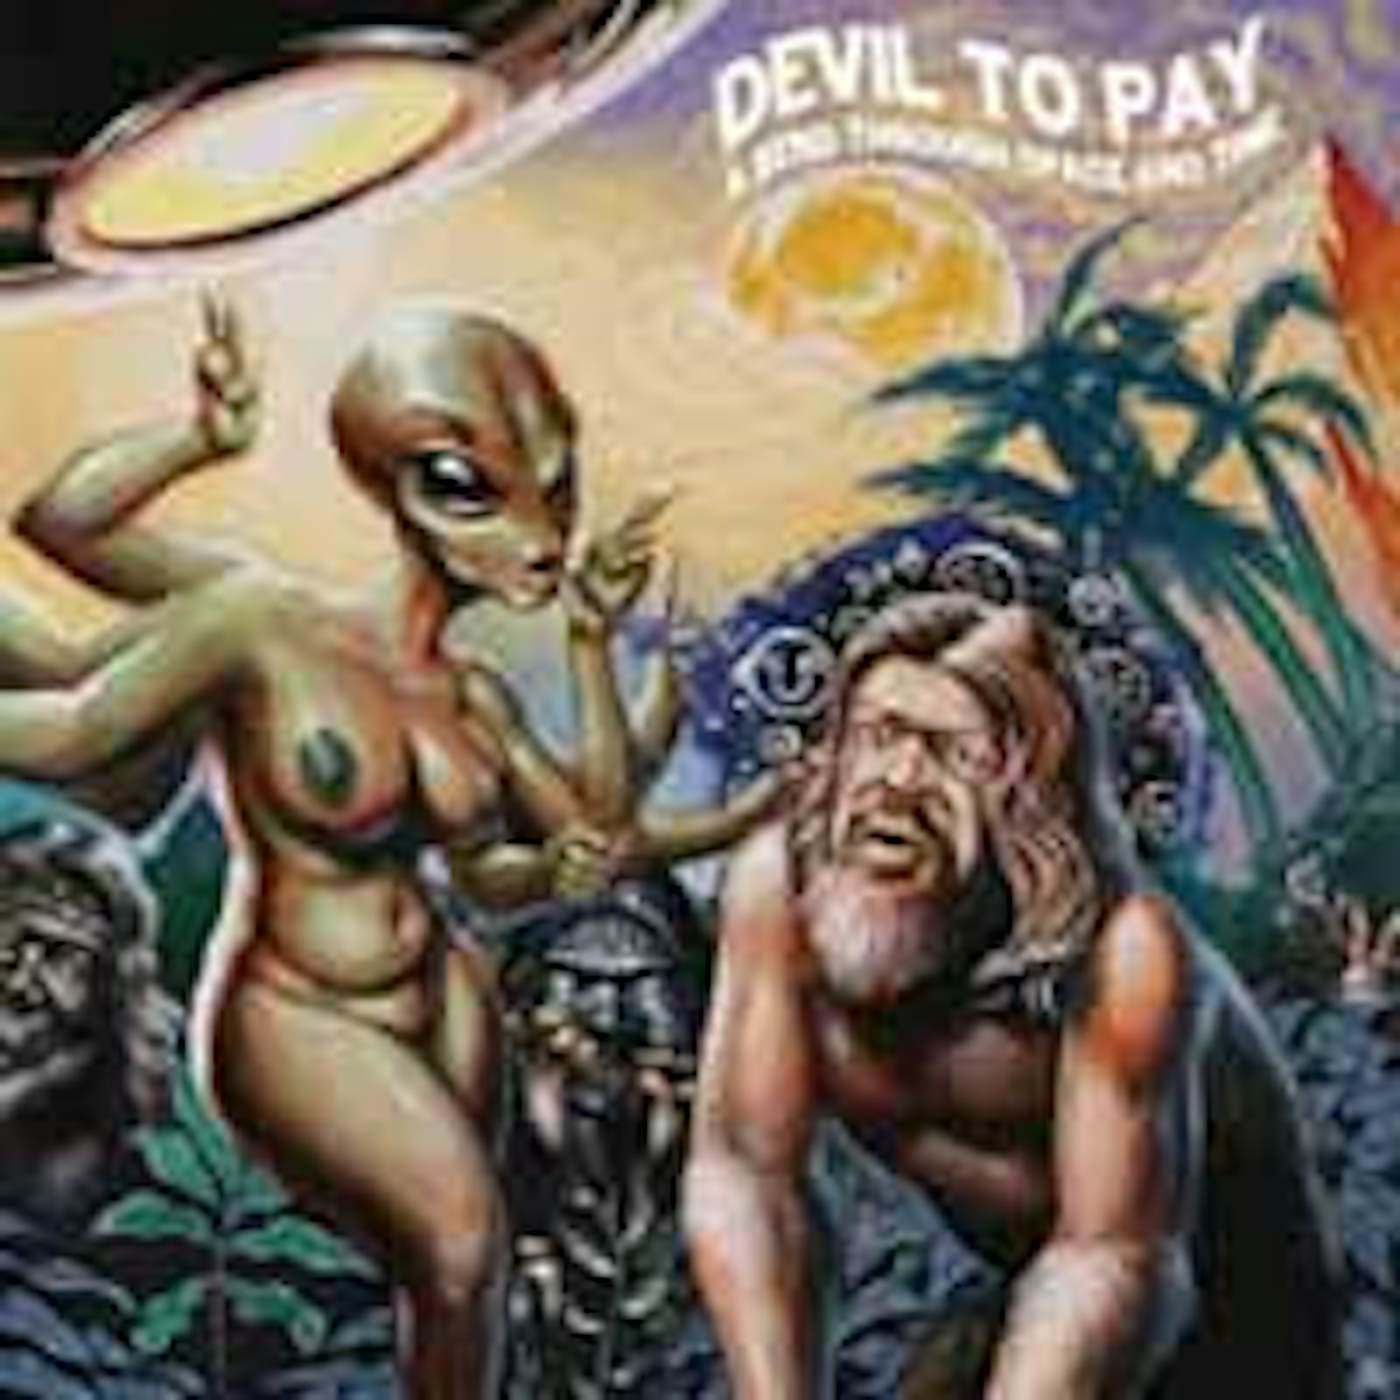 Devil To Pay LP - A Bend Through Space And Time (Vinyl)